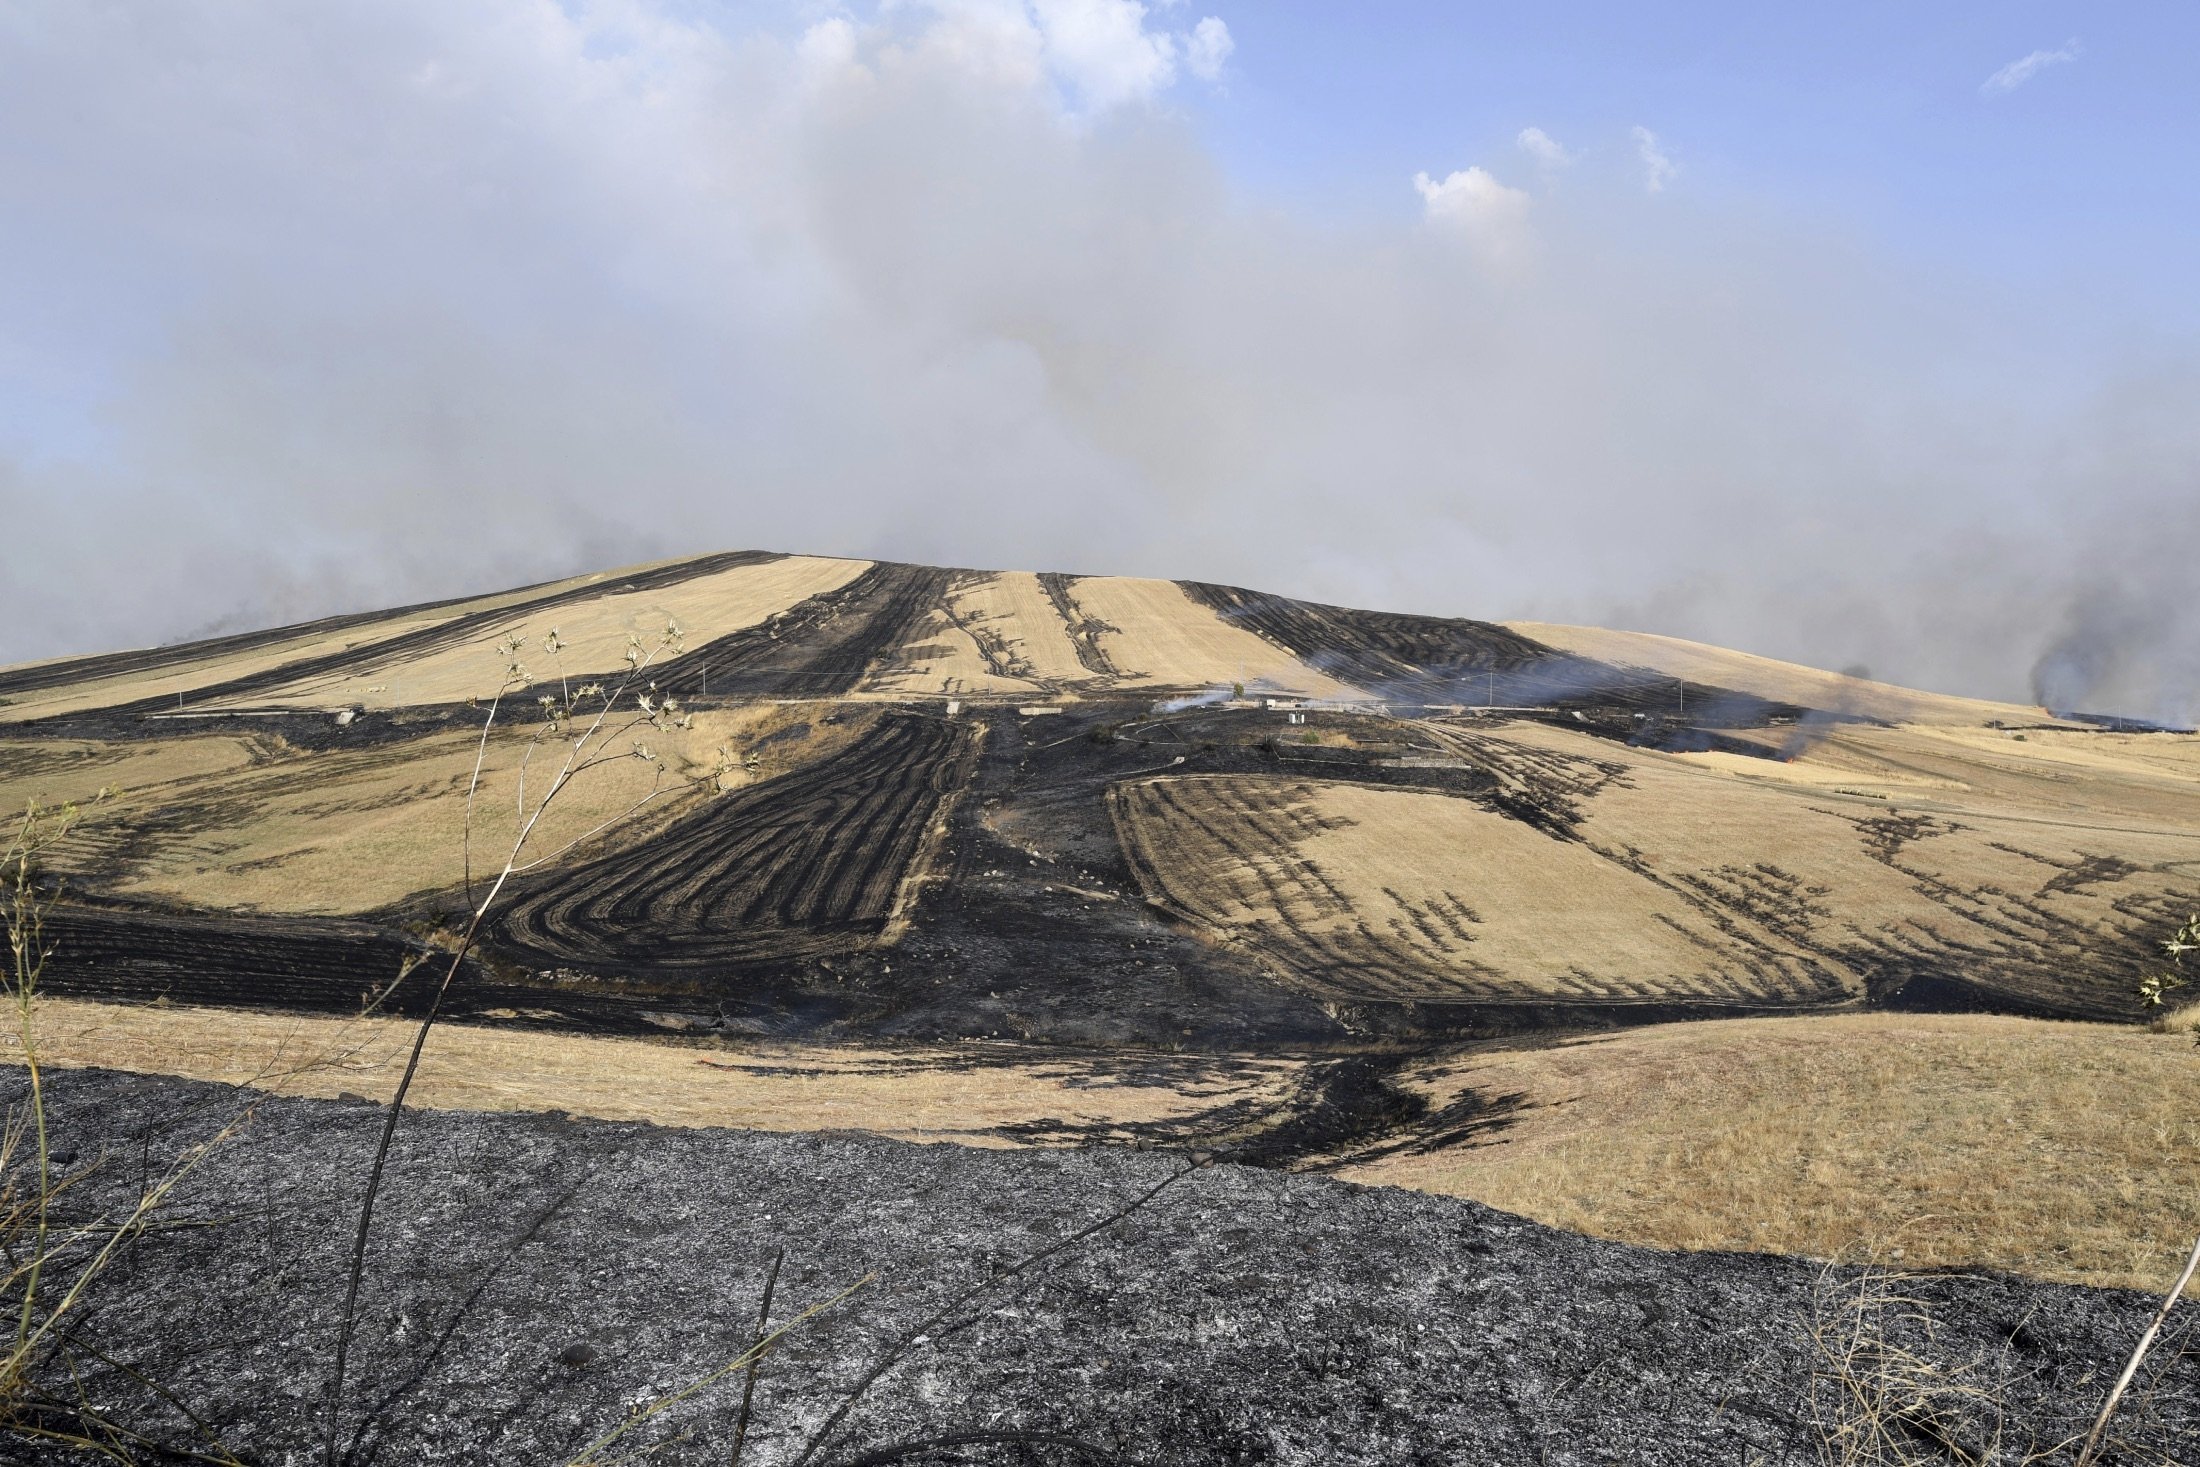 Burned fields can be seen in the Municipality of Blufi in the upper Madonie as many wildfires continue plaguing the region, near Palermo, Sicily, Italy, Aug. 10, 2021. (AP Photo)